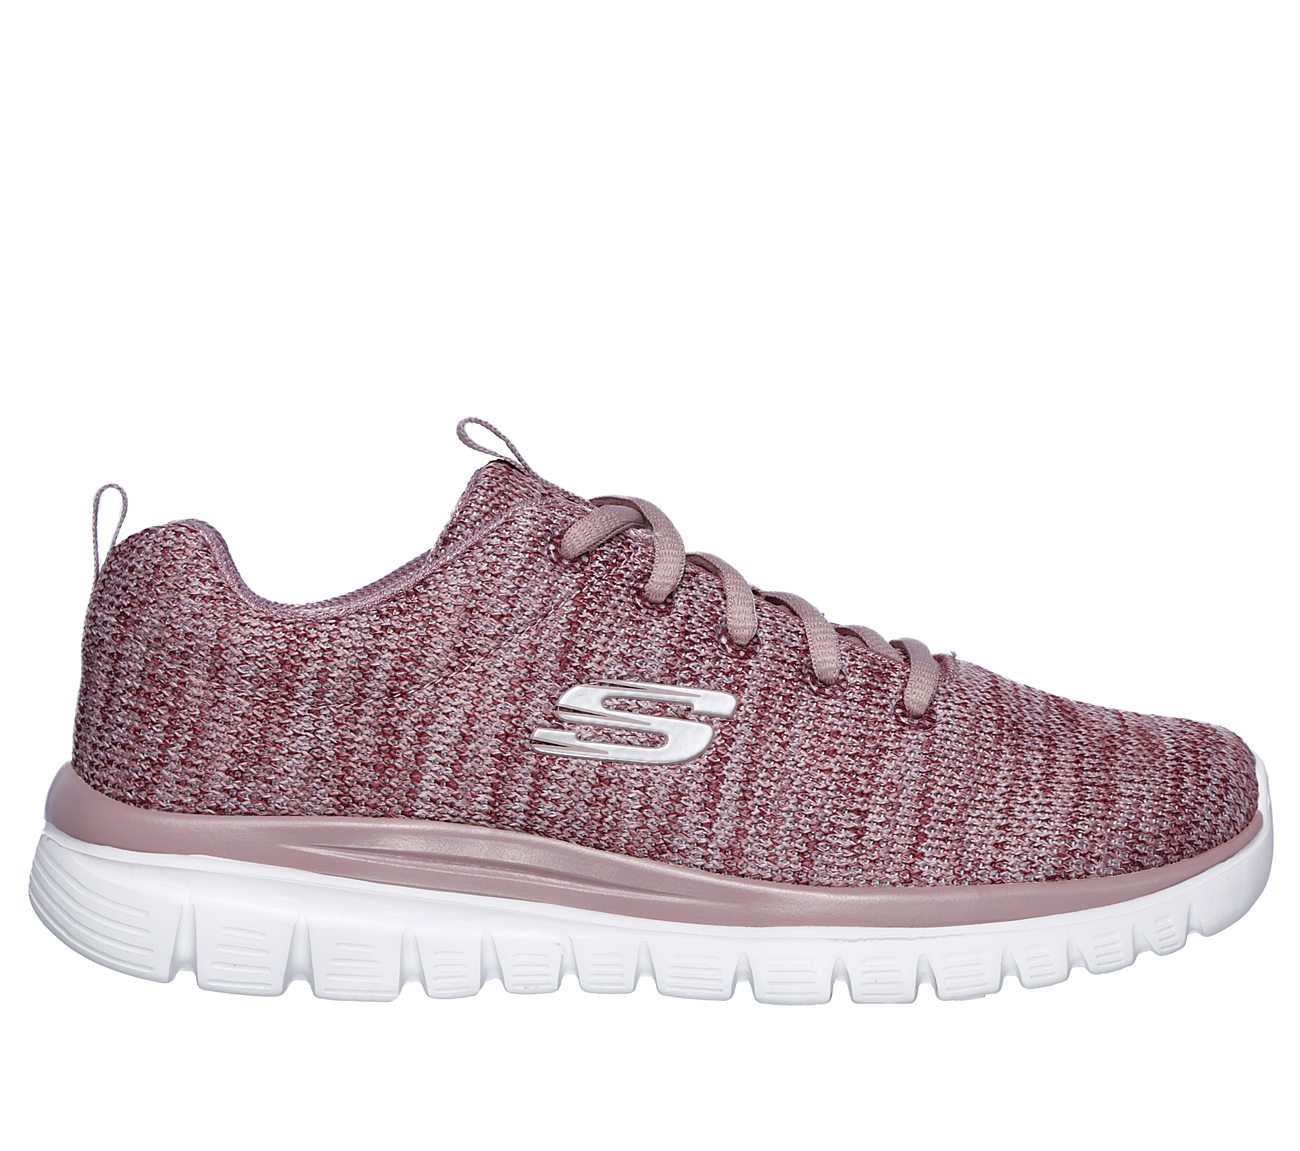 Buy SKECHERS Graceful - Twisted Fortune 